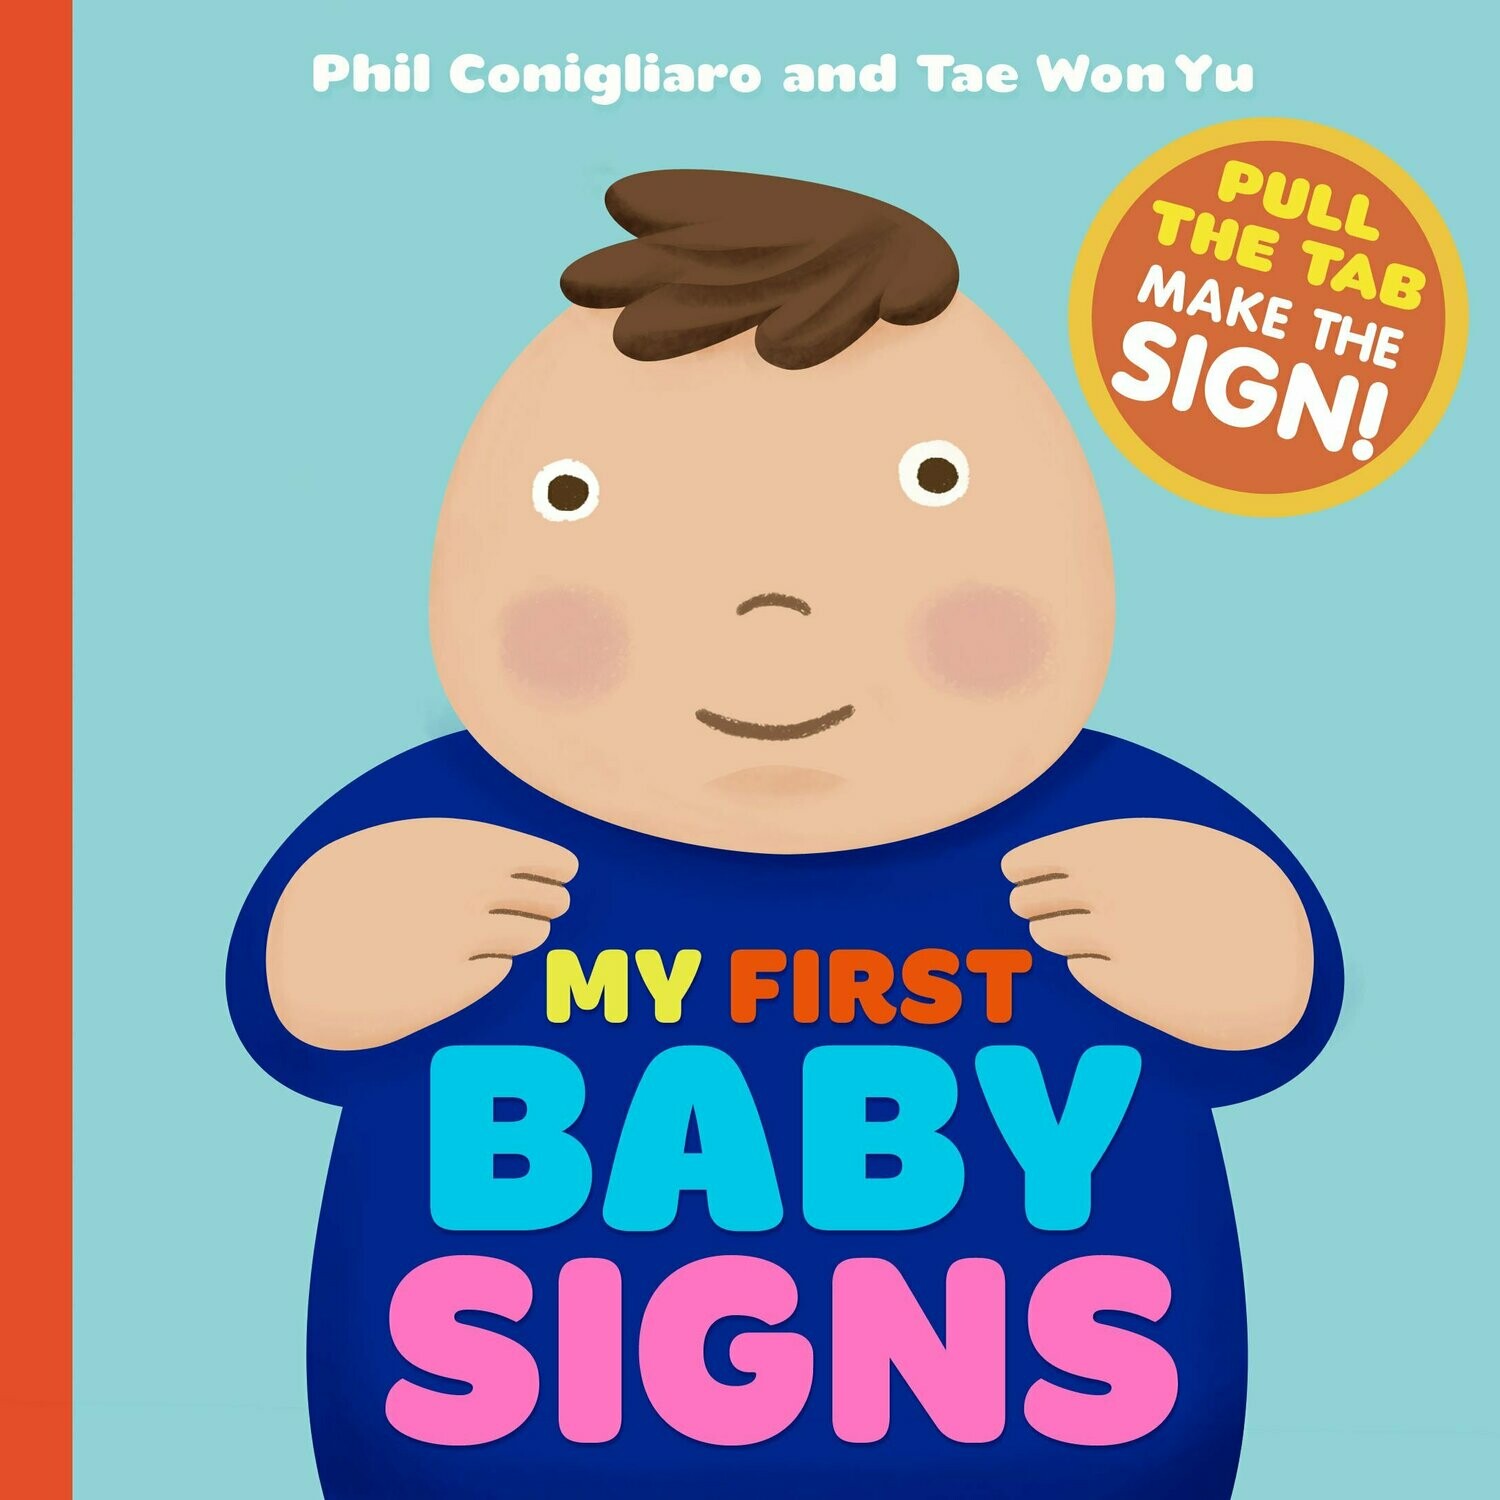 "My First Baby Signs" Book